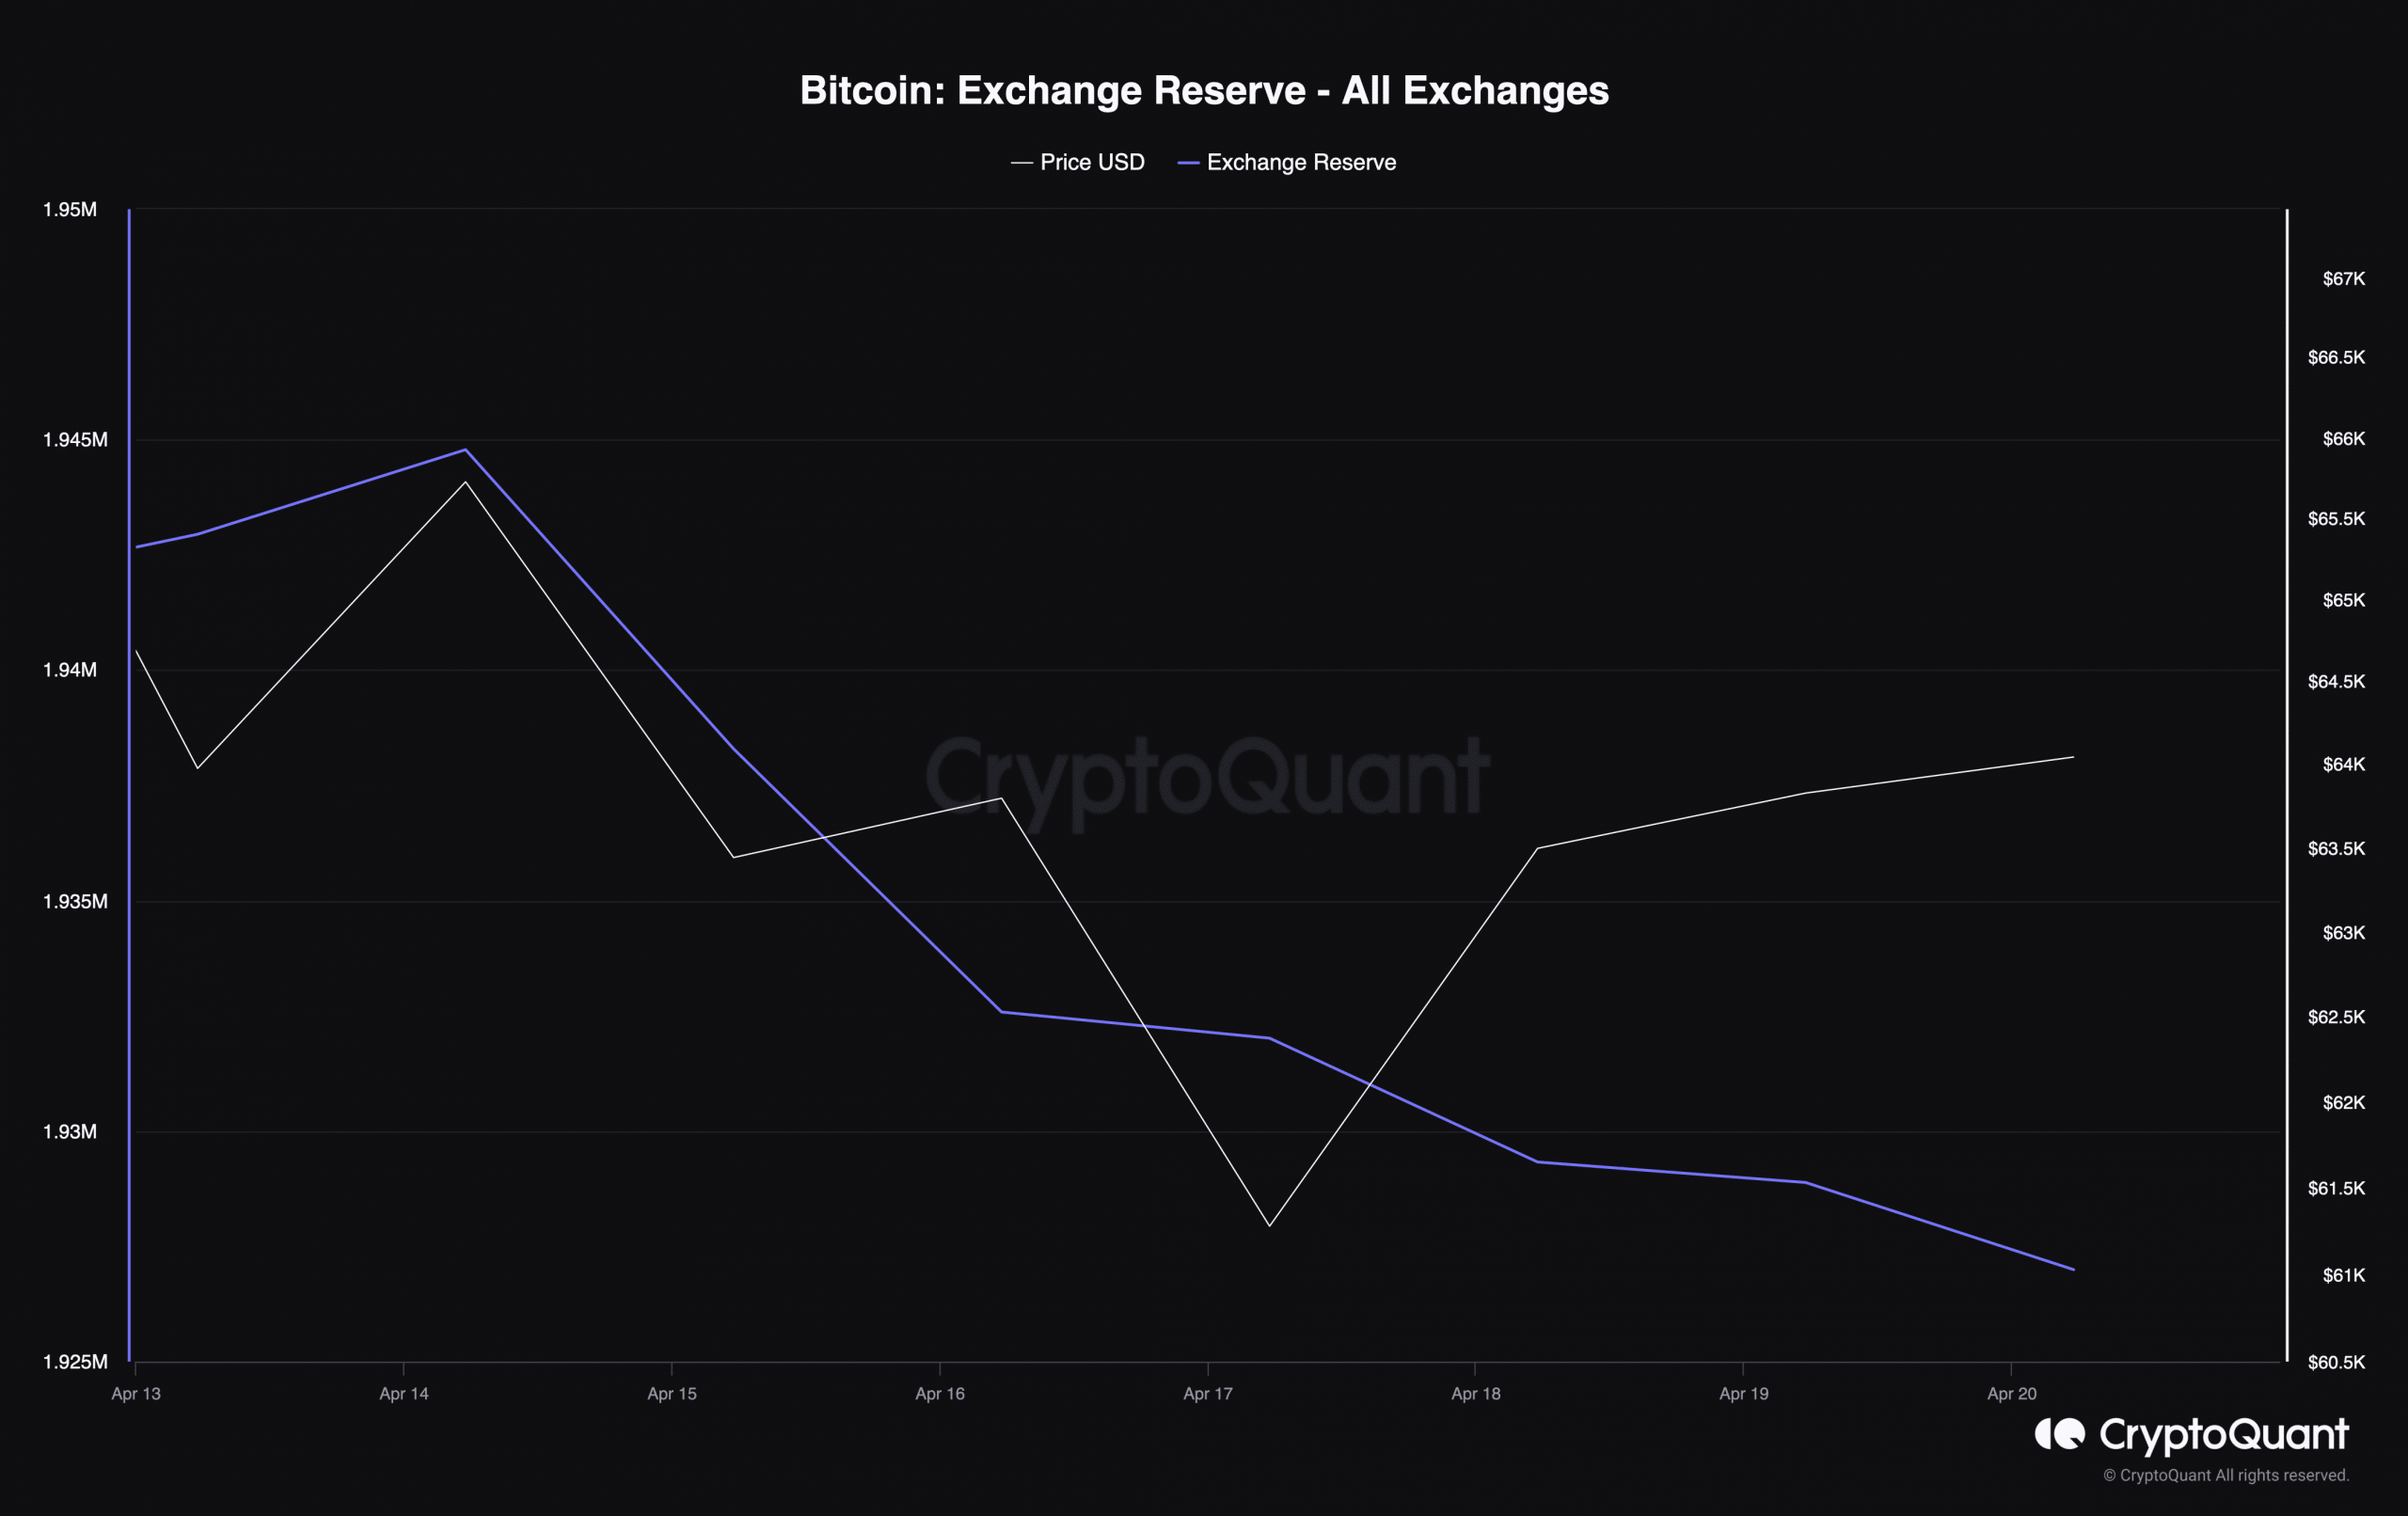 BTC's foreign exchange reserve fell